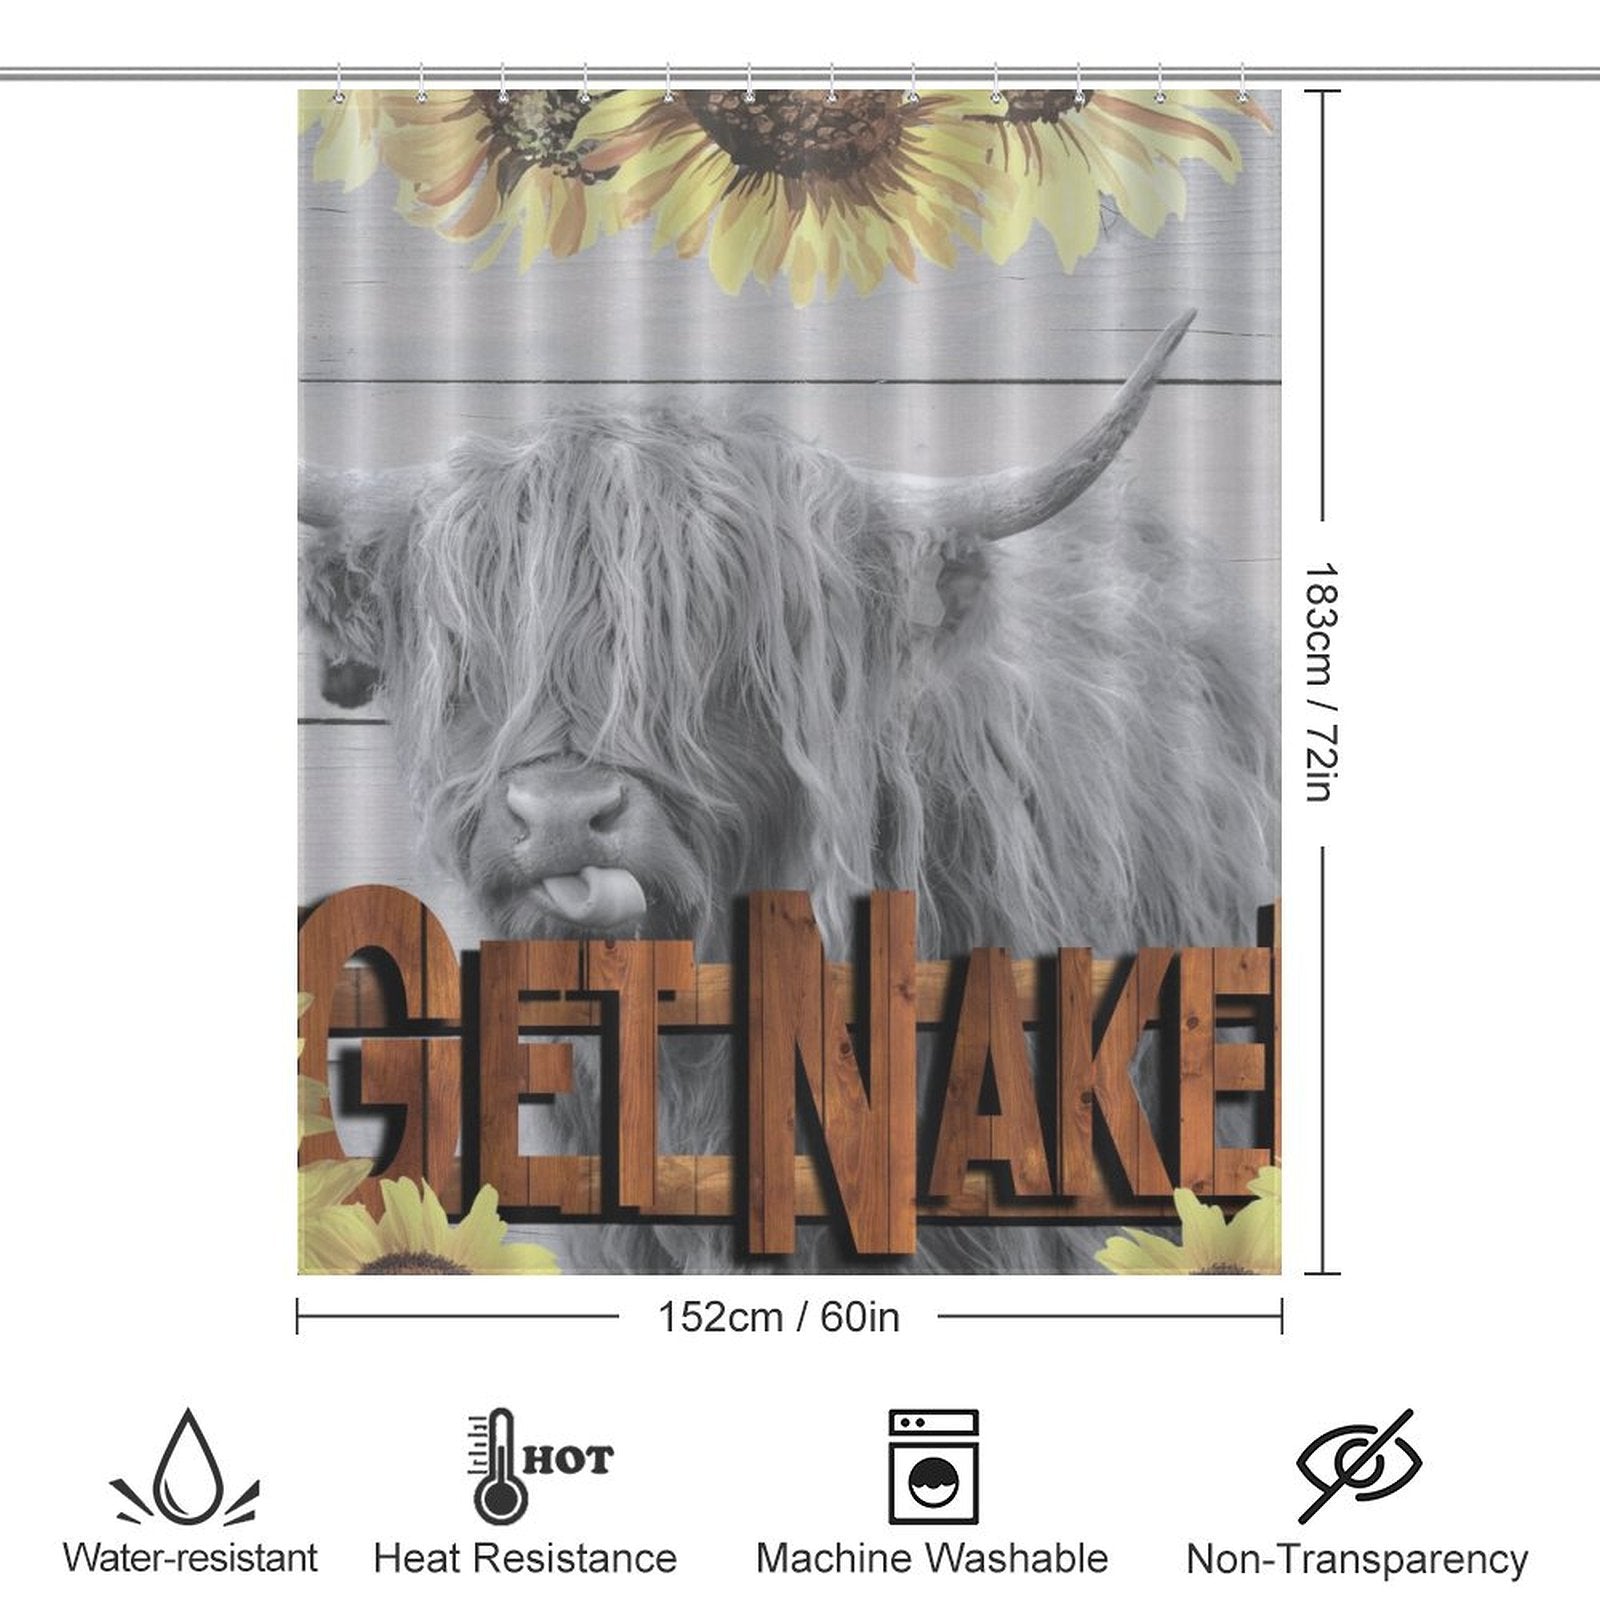 Add a touch of rustic charm to your bathroom with this Highland Cow Sunflowers Get Naked Shower Curtain-Cottoncat. Featuring large "Get Naked" text and a vibrant sunflower border, its 183 cm by 152 cm dimensions ensure perfect coverage. Icons indicate it's water-resistant, heat-resistant, machine washable, and non-transparent.